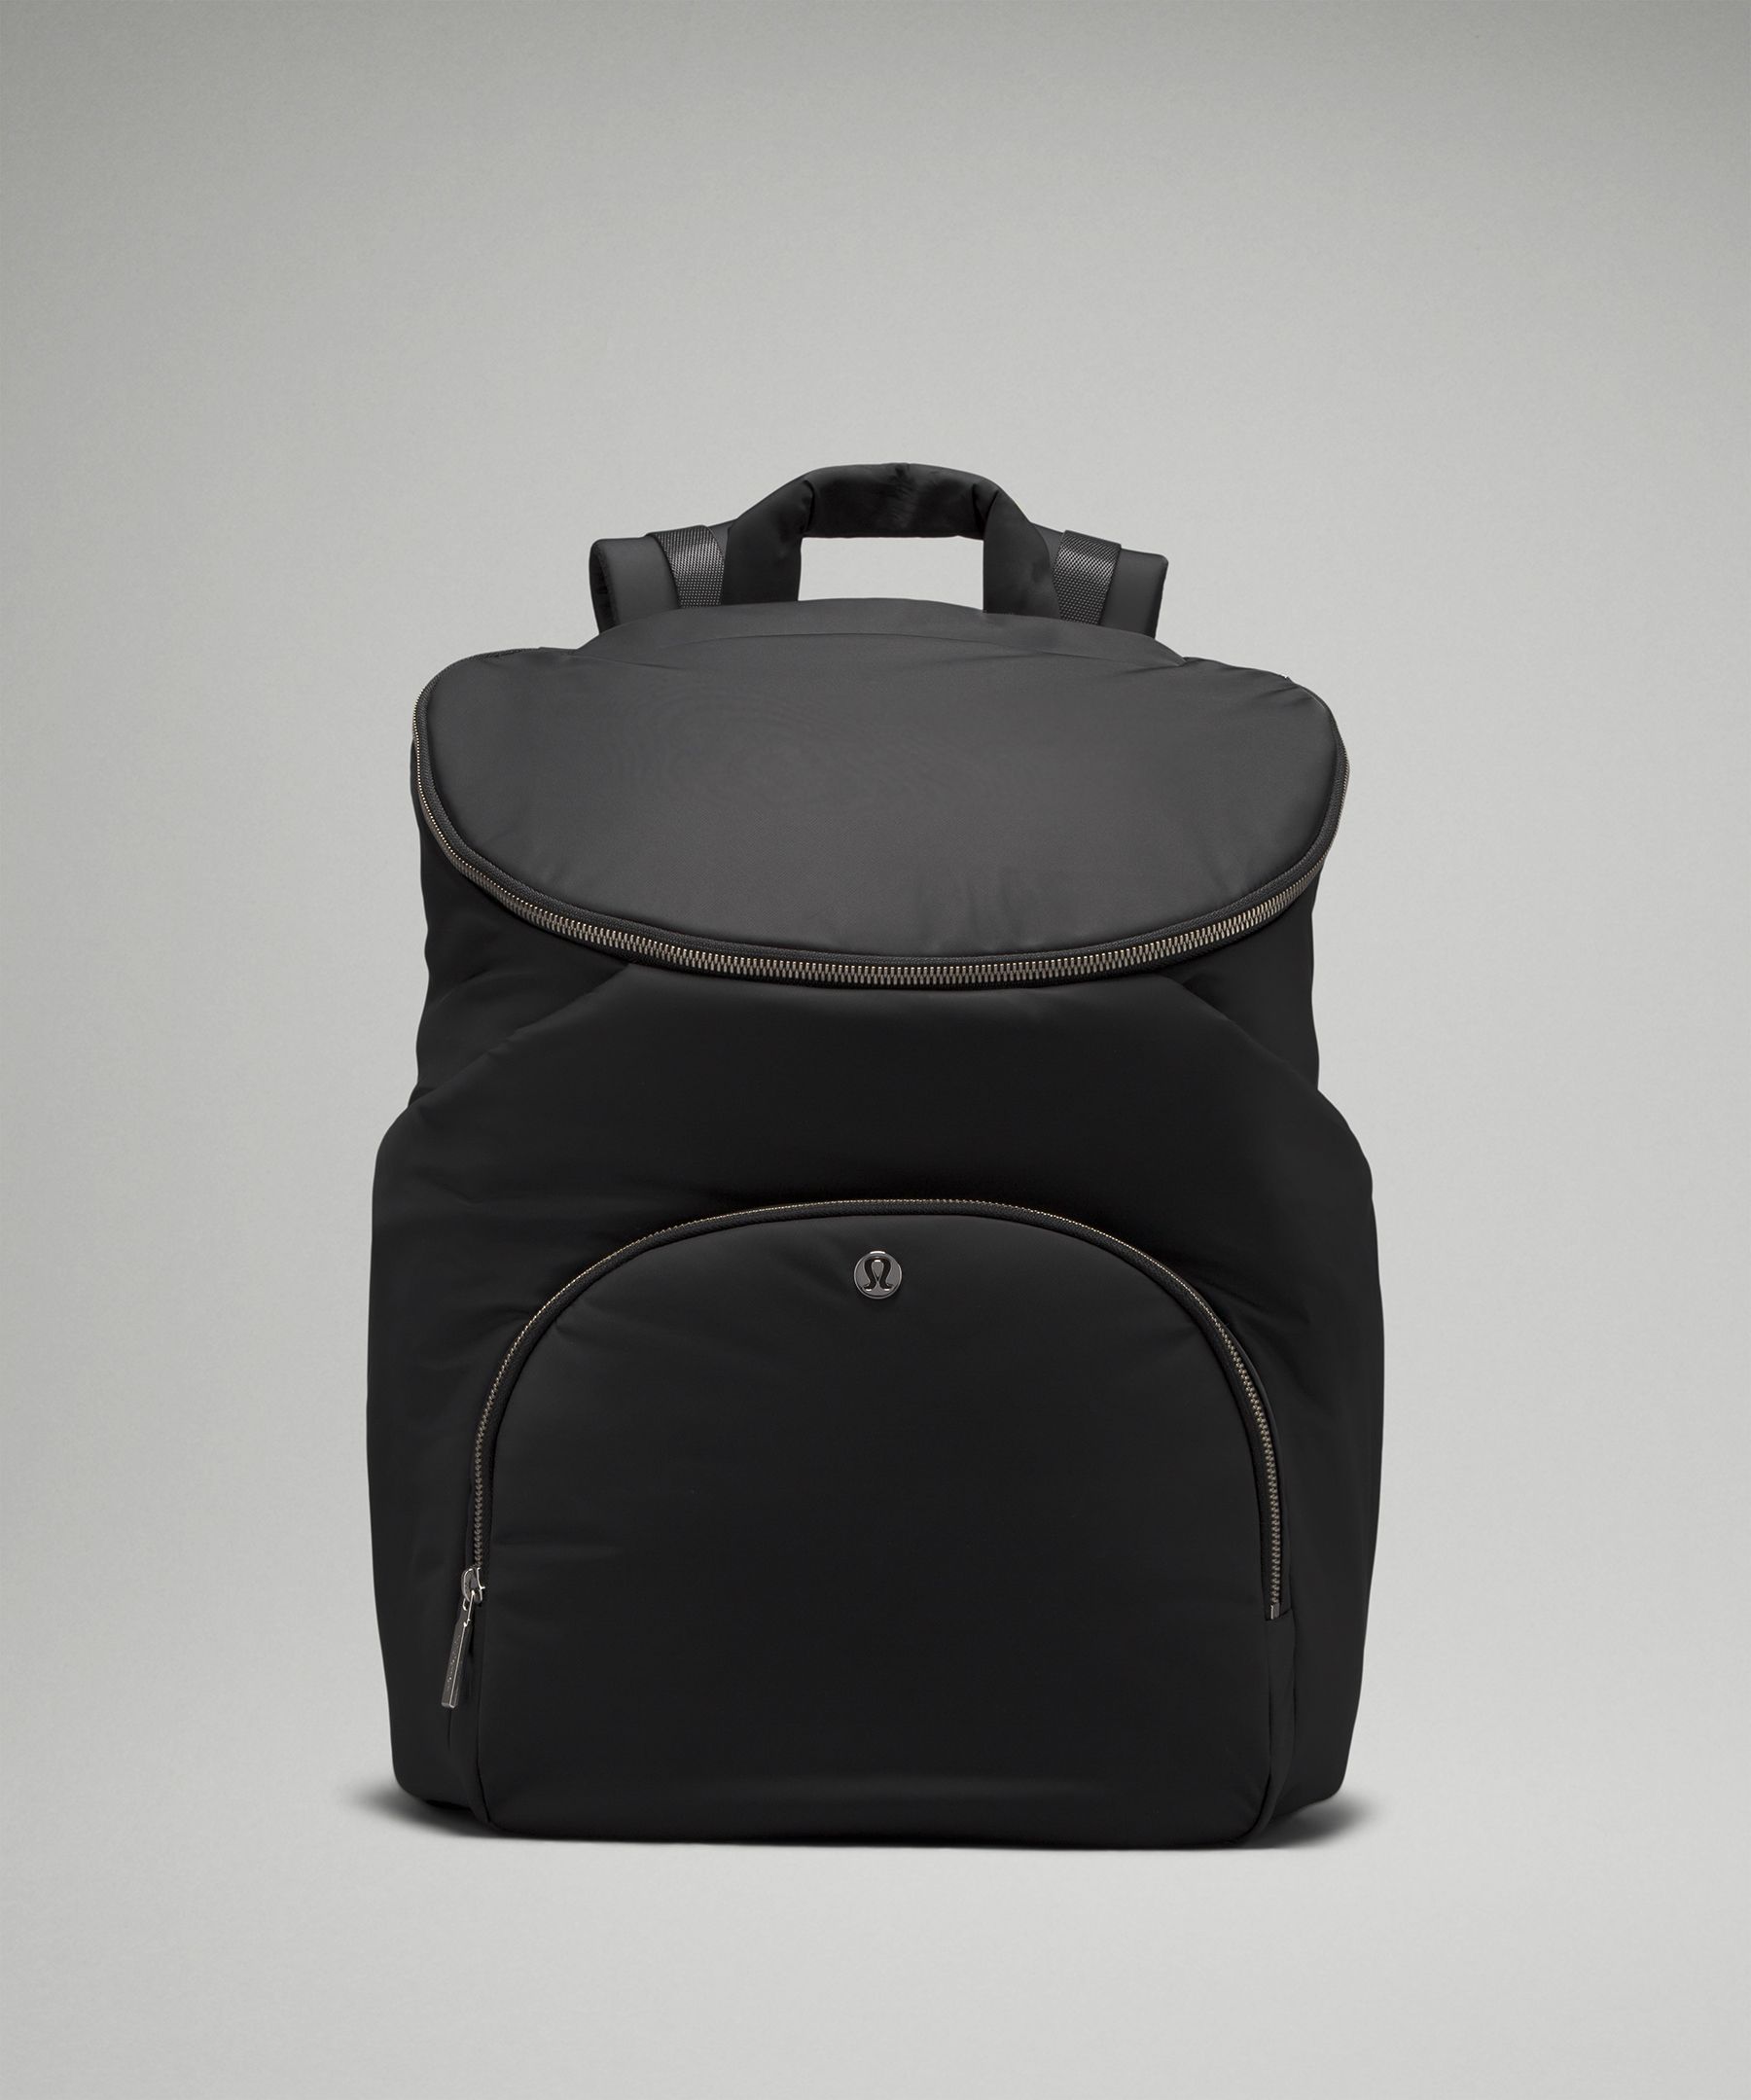 New Parent Backpack 17L *Online Only | Unisex Bags,Purses,Wallets